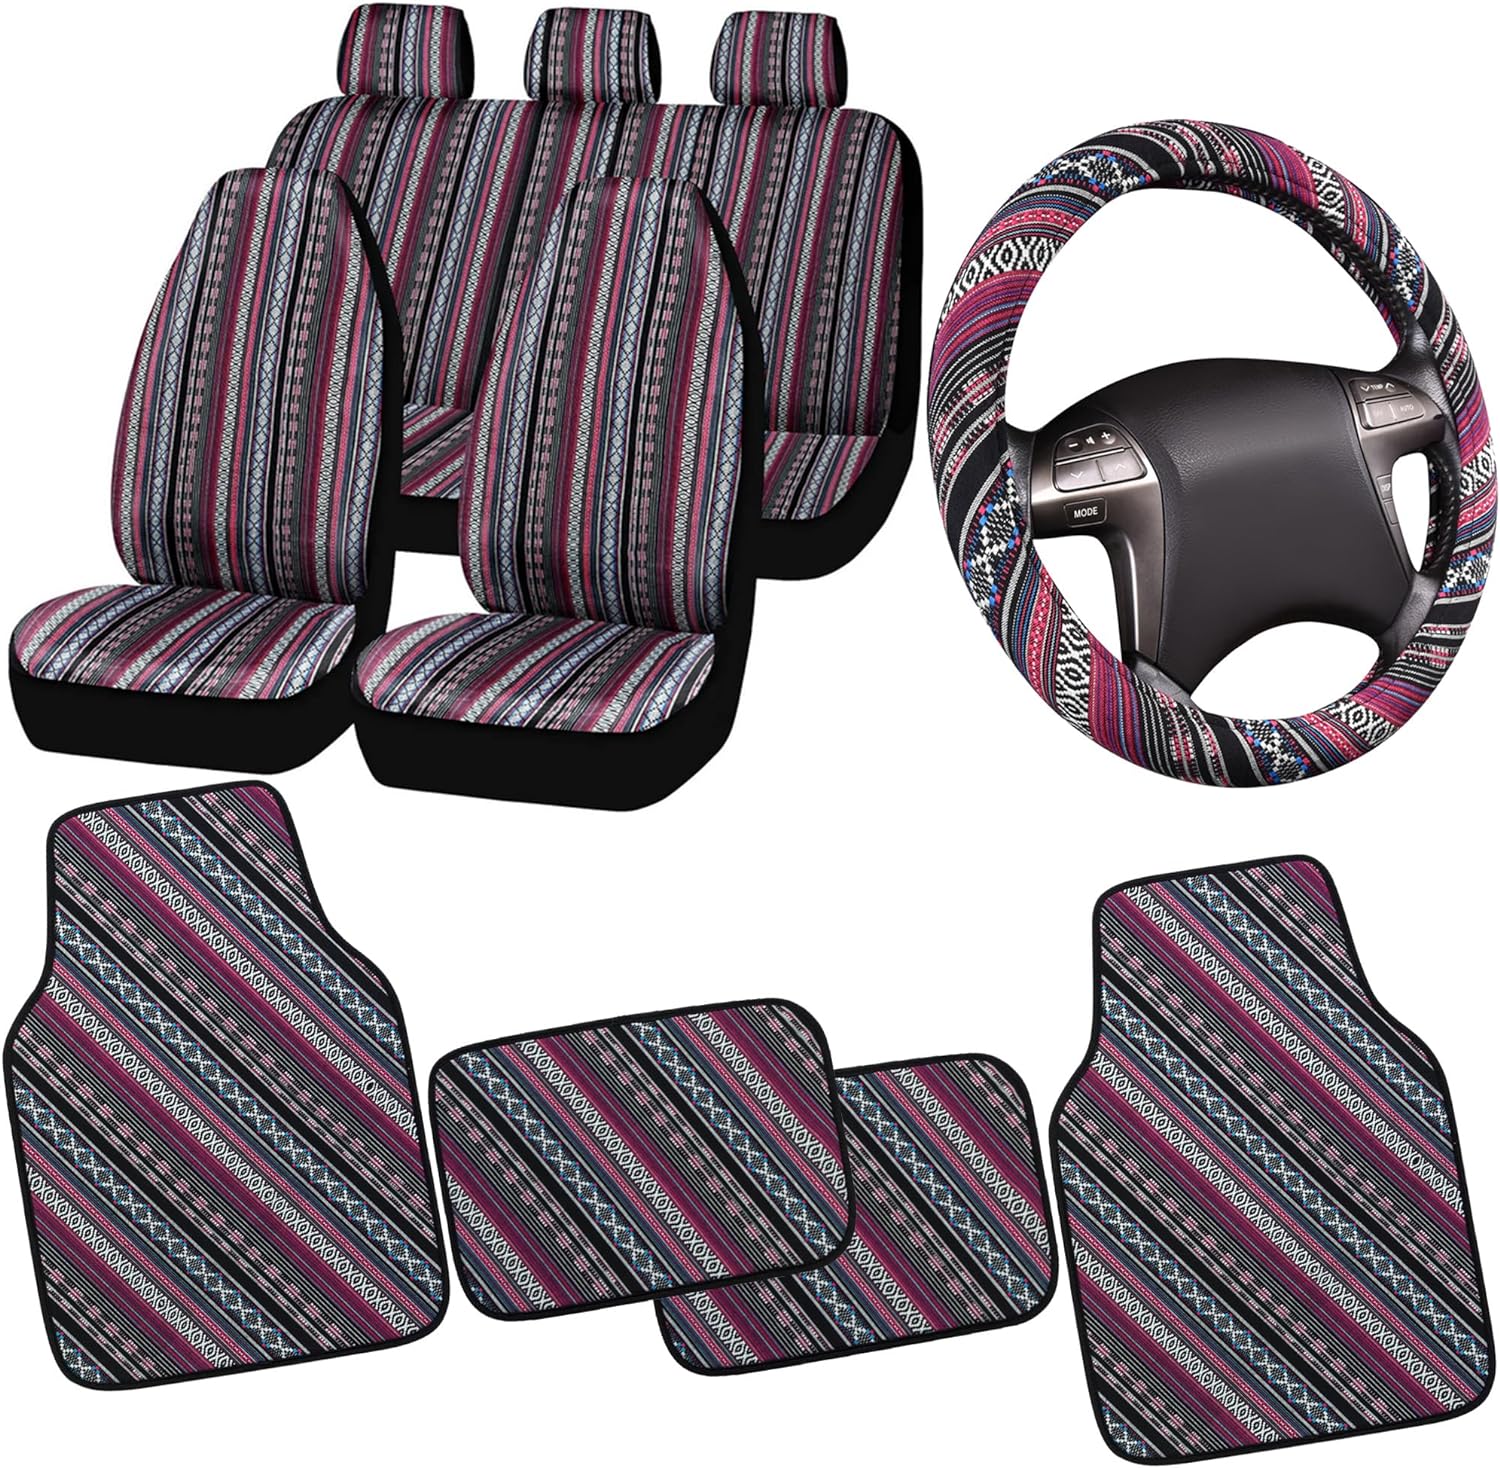 CAR PASS Ethnic Boho Bundle Car Floor Mats with Car Seat Covers Full Set and Steering Wheel Cover, Universal Fit for Convertible Coupe Hatchback Pickup Sedan SUV Wagon Truck